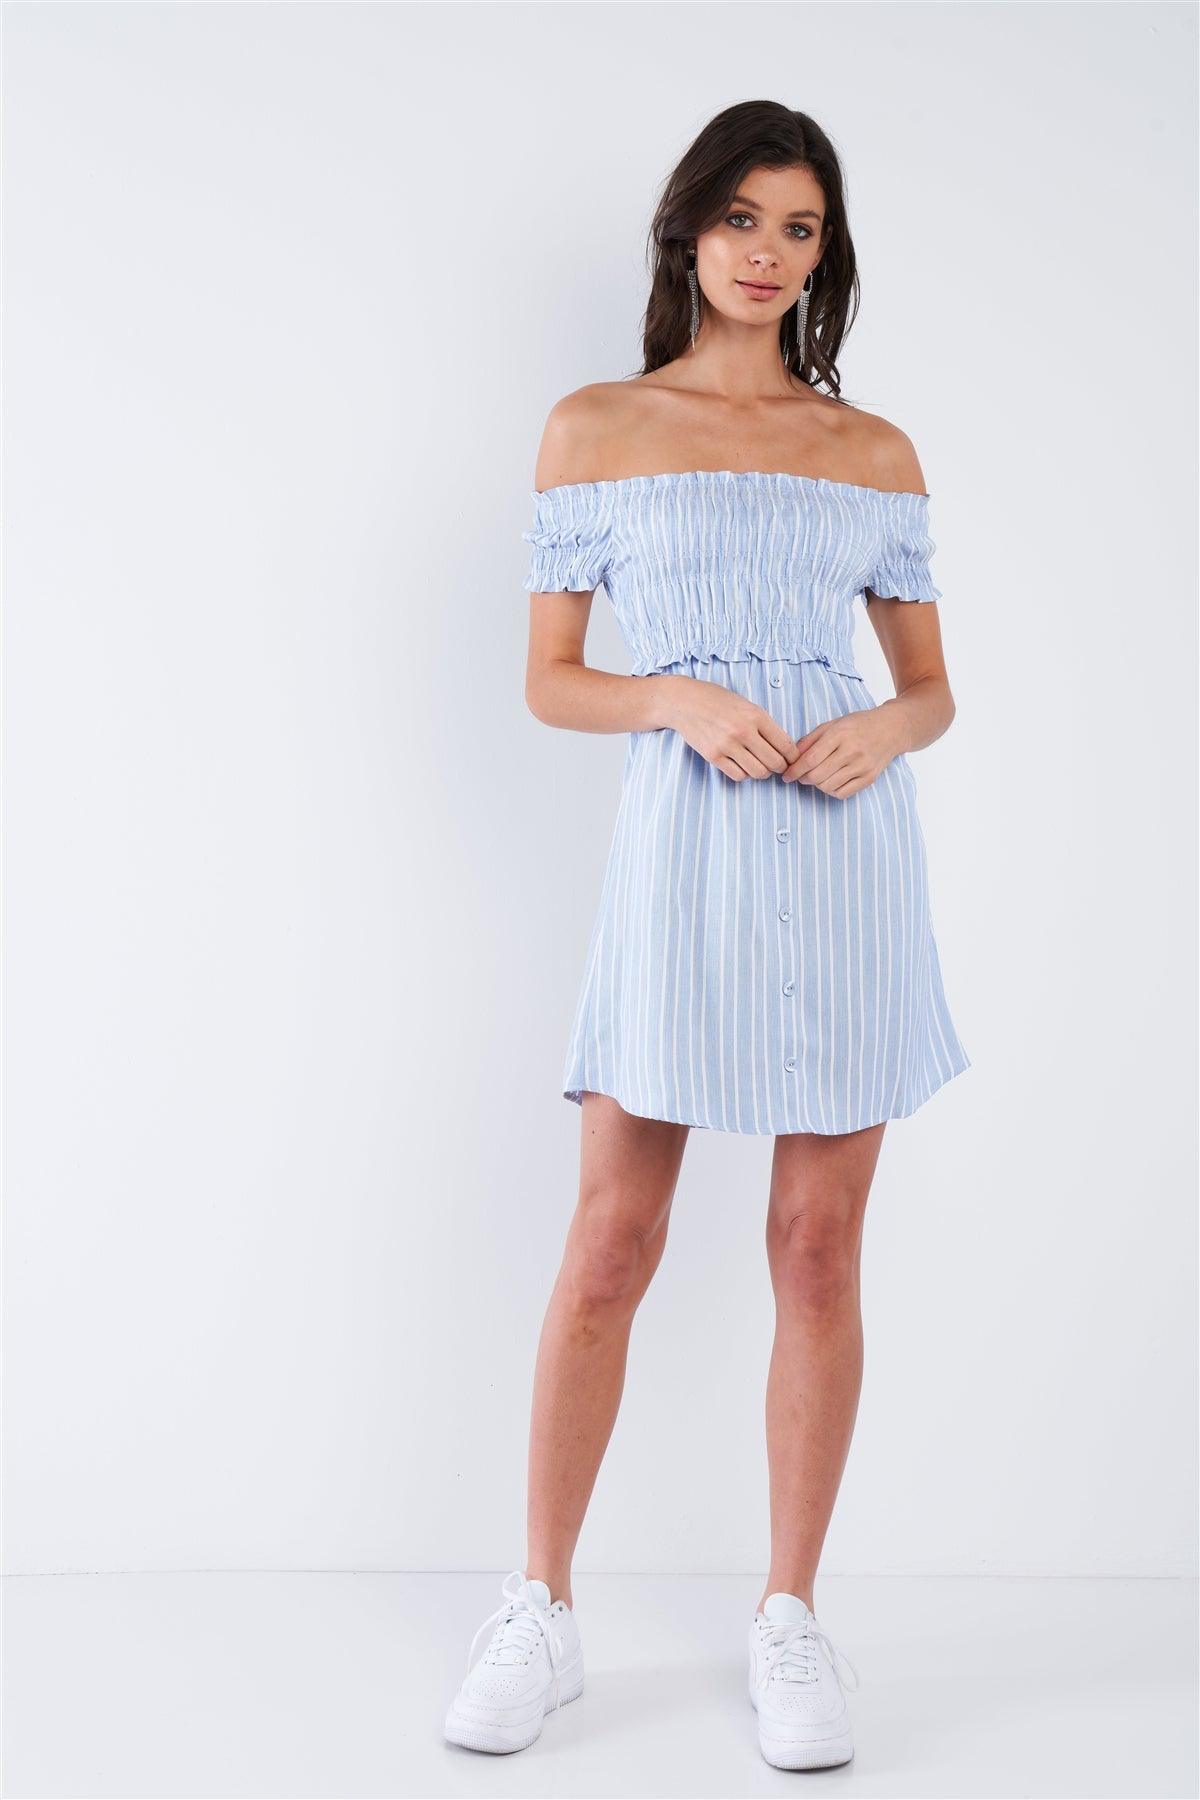 Blue & White Stripe Ruched Off-The-Shoulder Mini front Button Dress /3-2-1